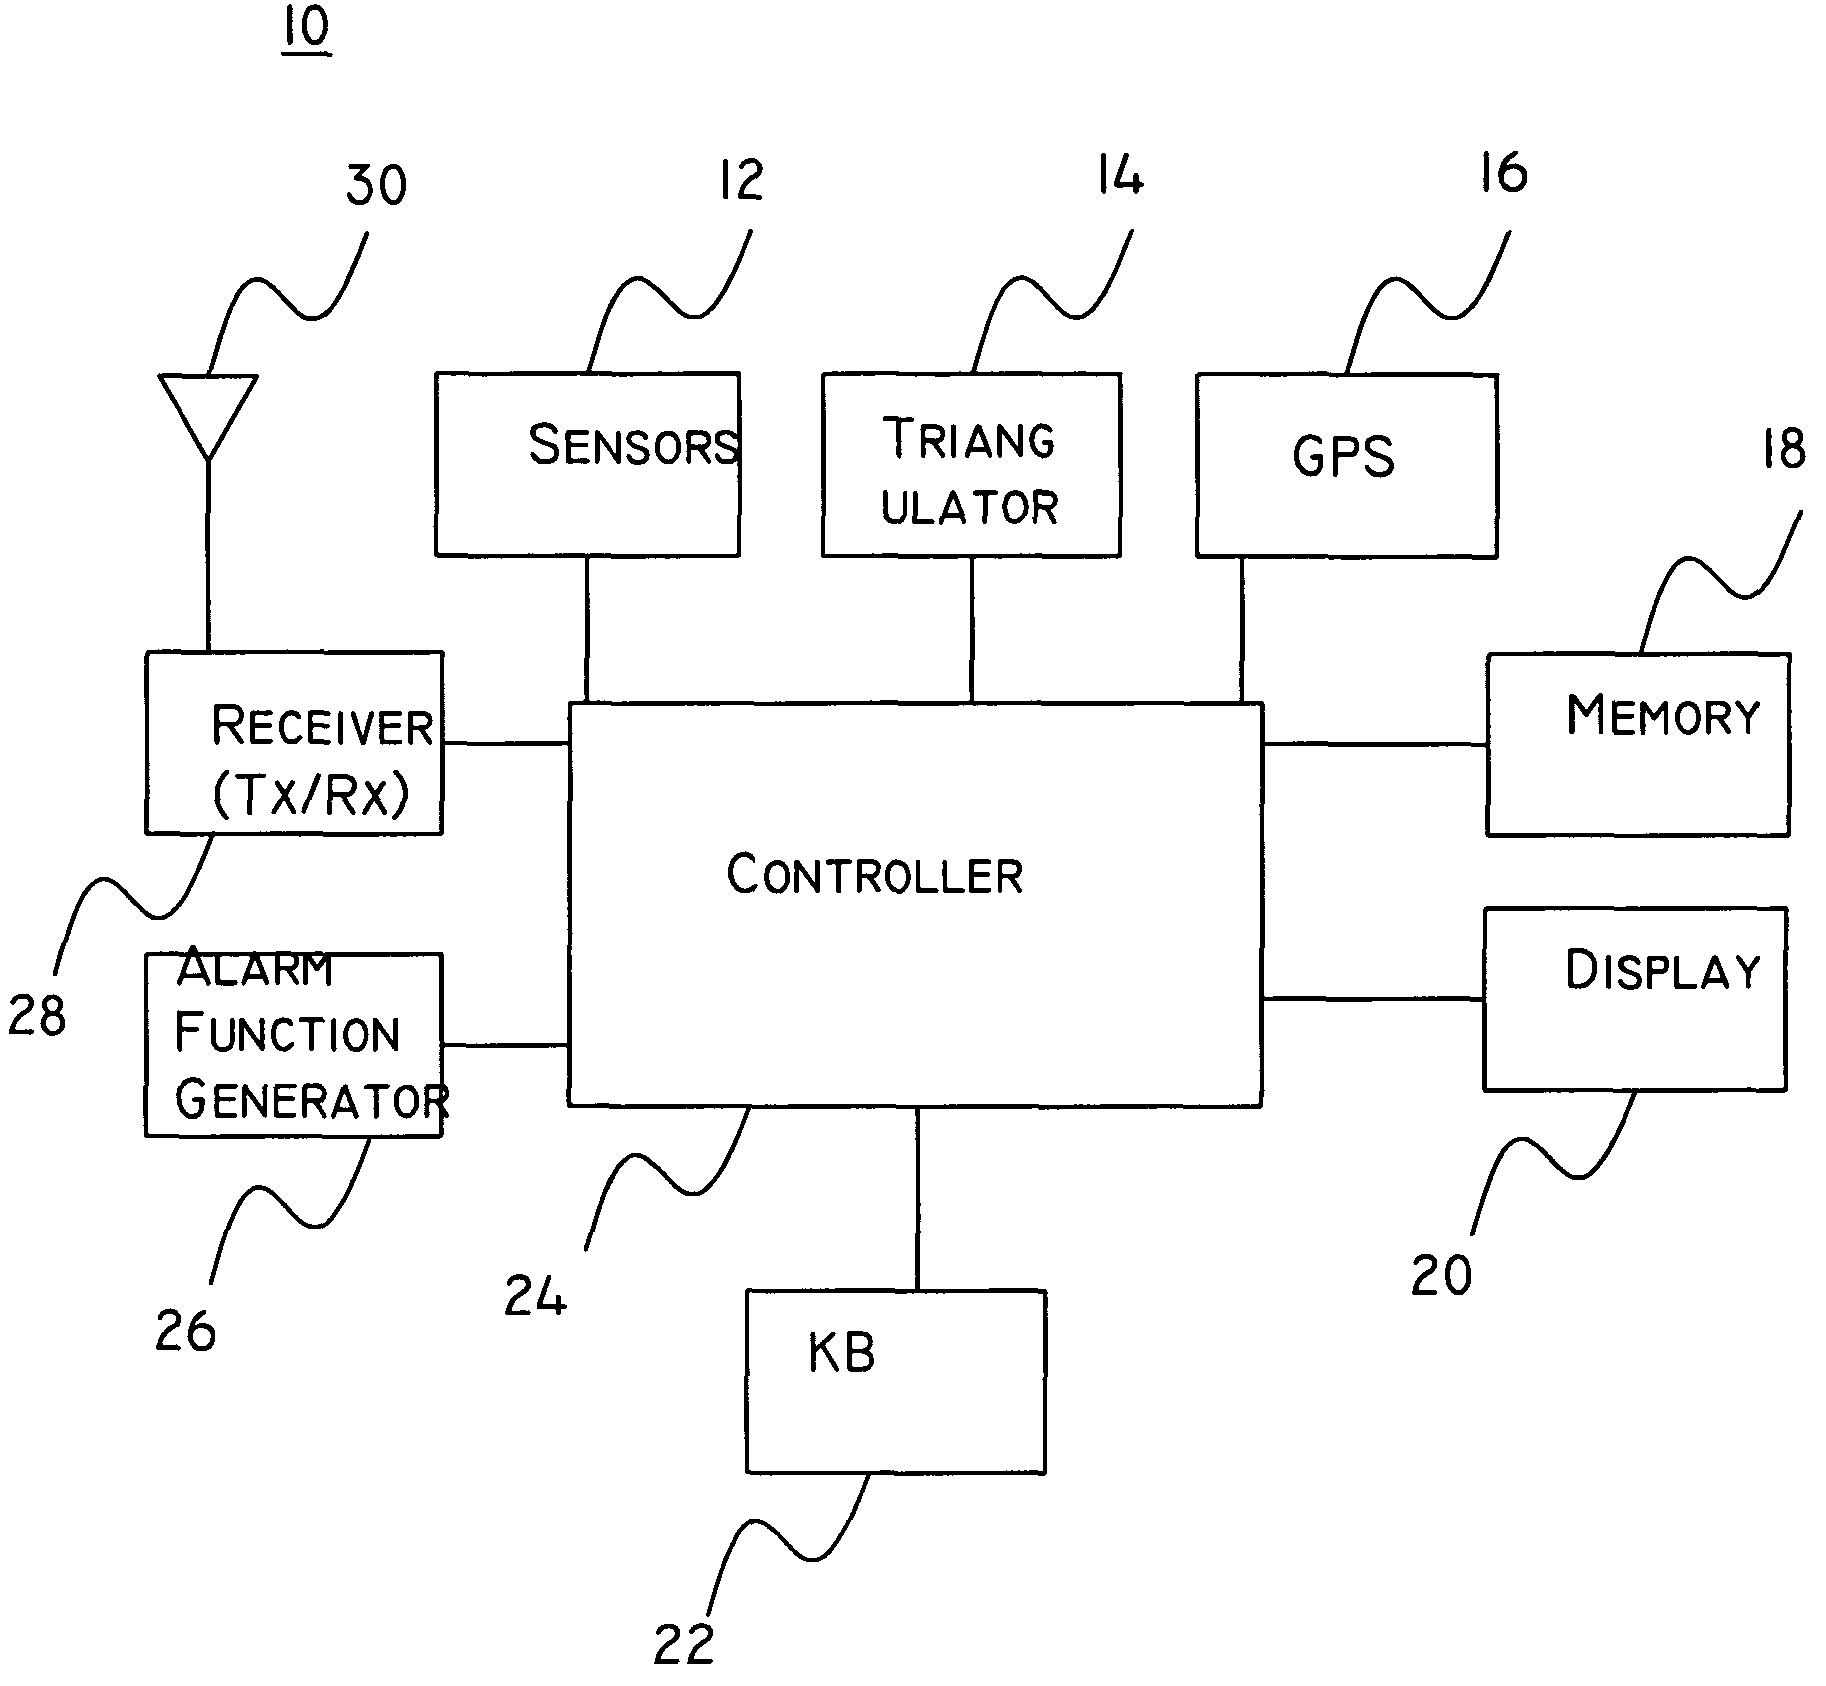 System and method for setting functions according to location